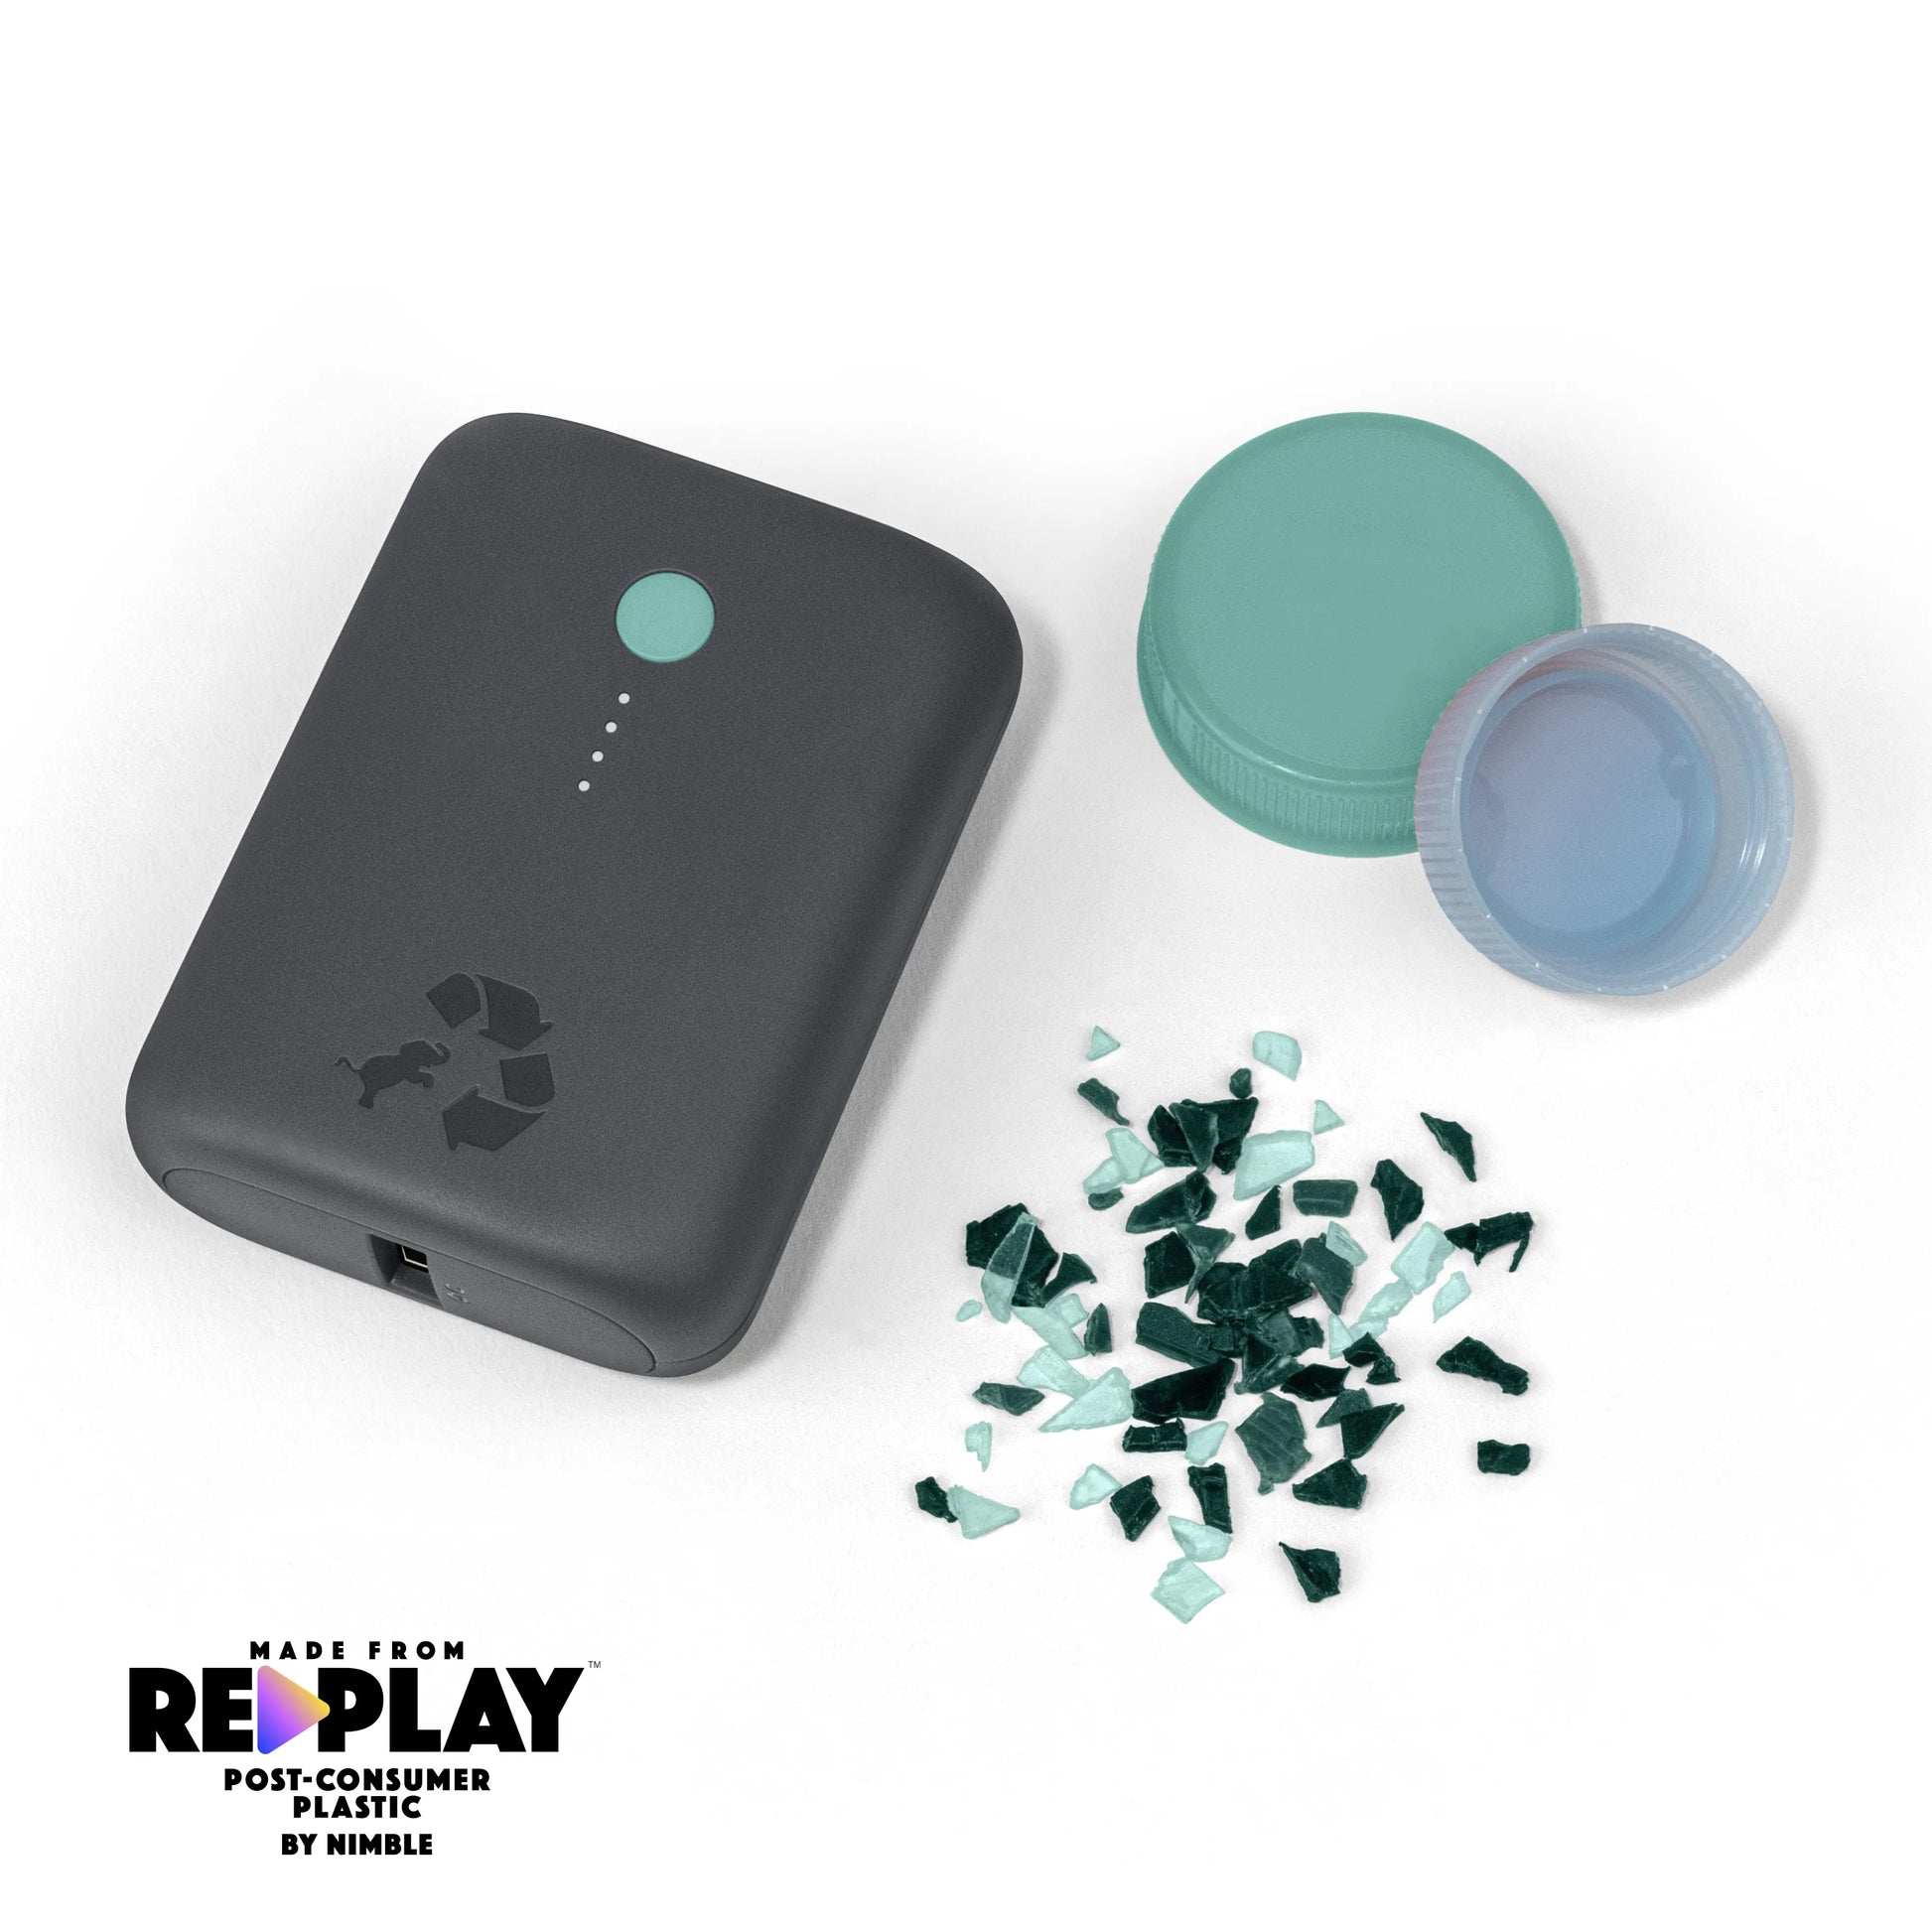 Charcoal portable charger with green button next to bottle caps and shredded plastic.